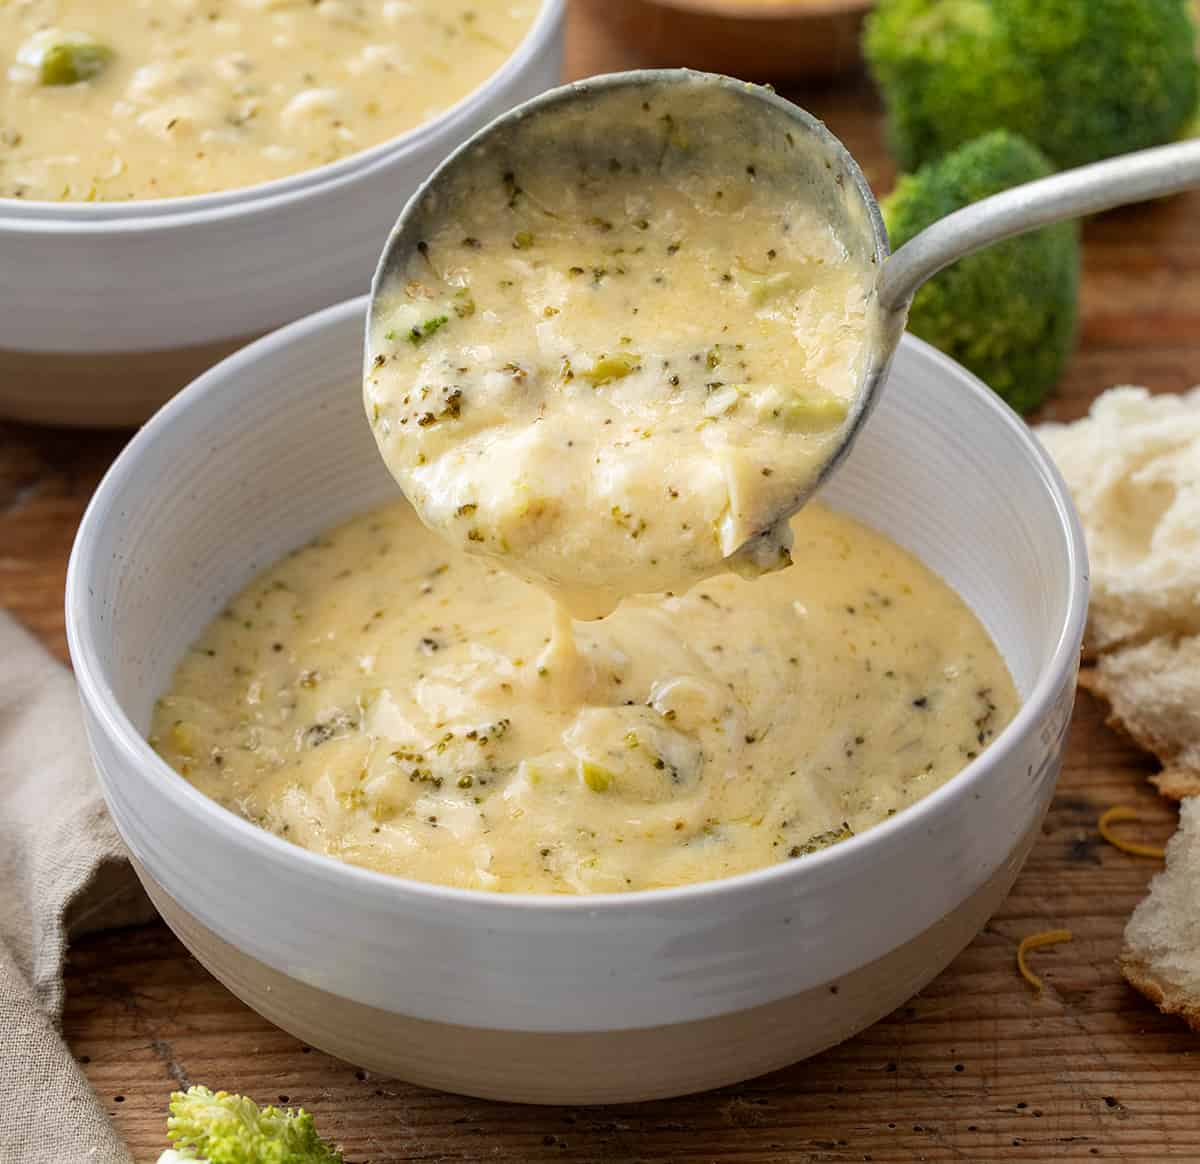 Scooping Roasted Broccoli and Cheese Soup into a Bowl with a Silver Ladle.